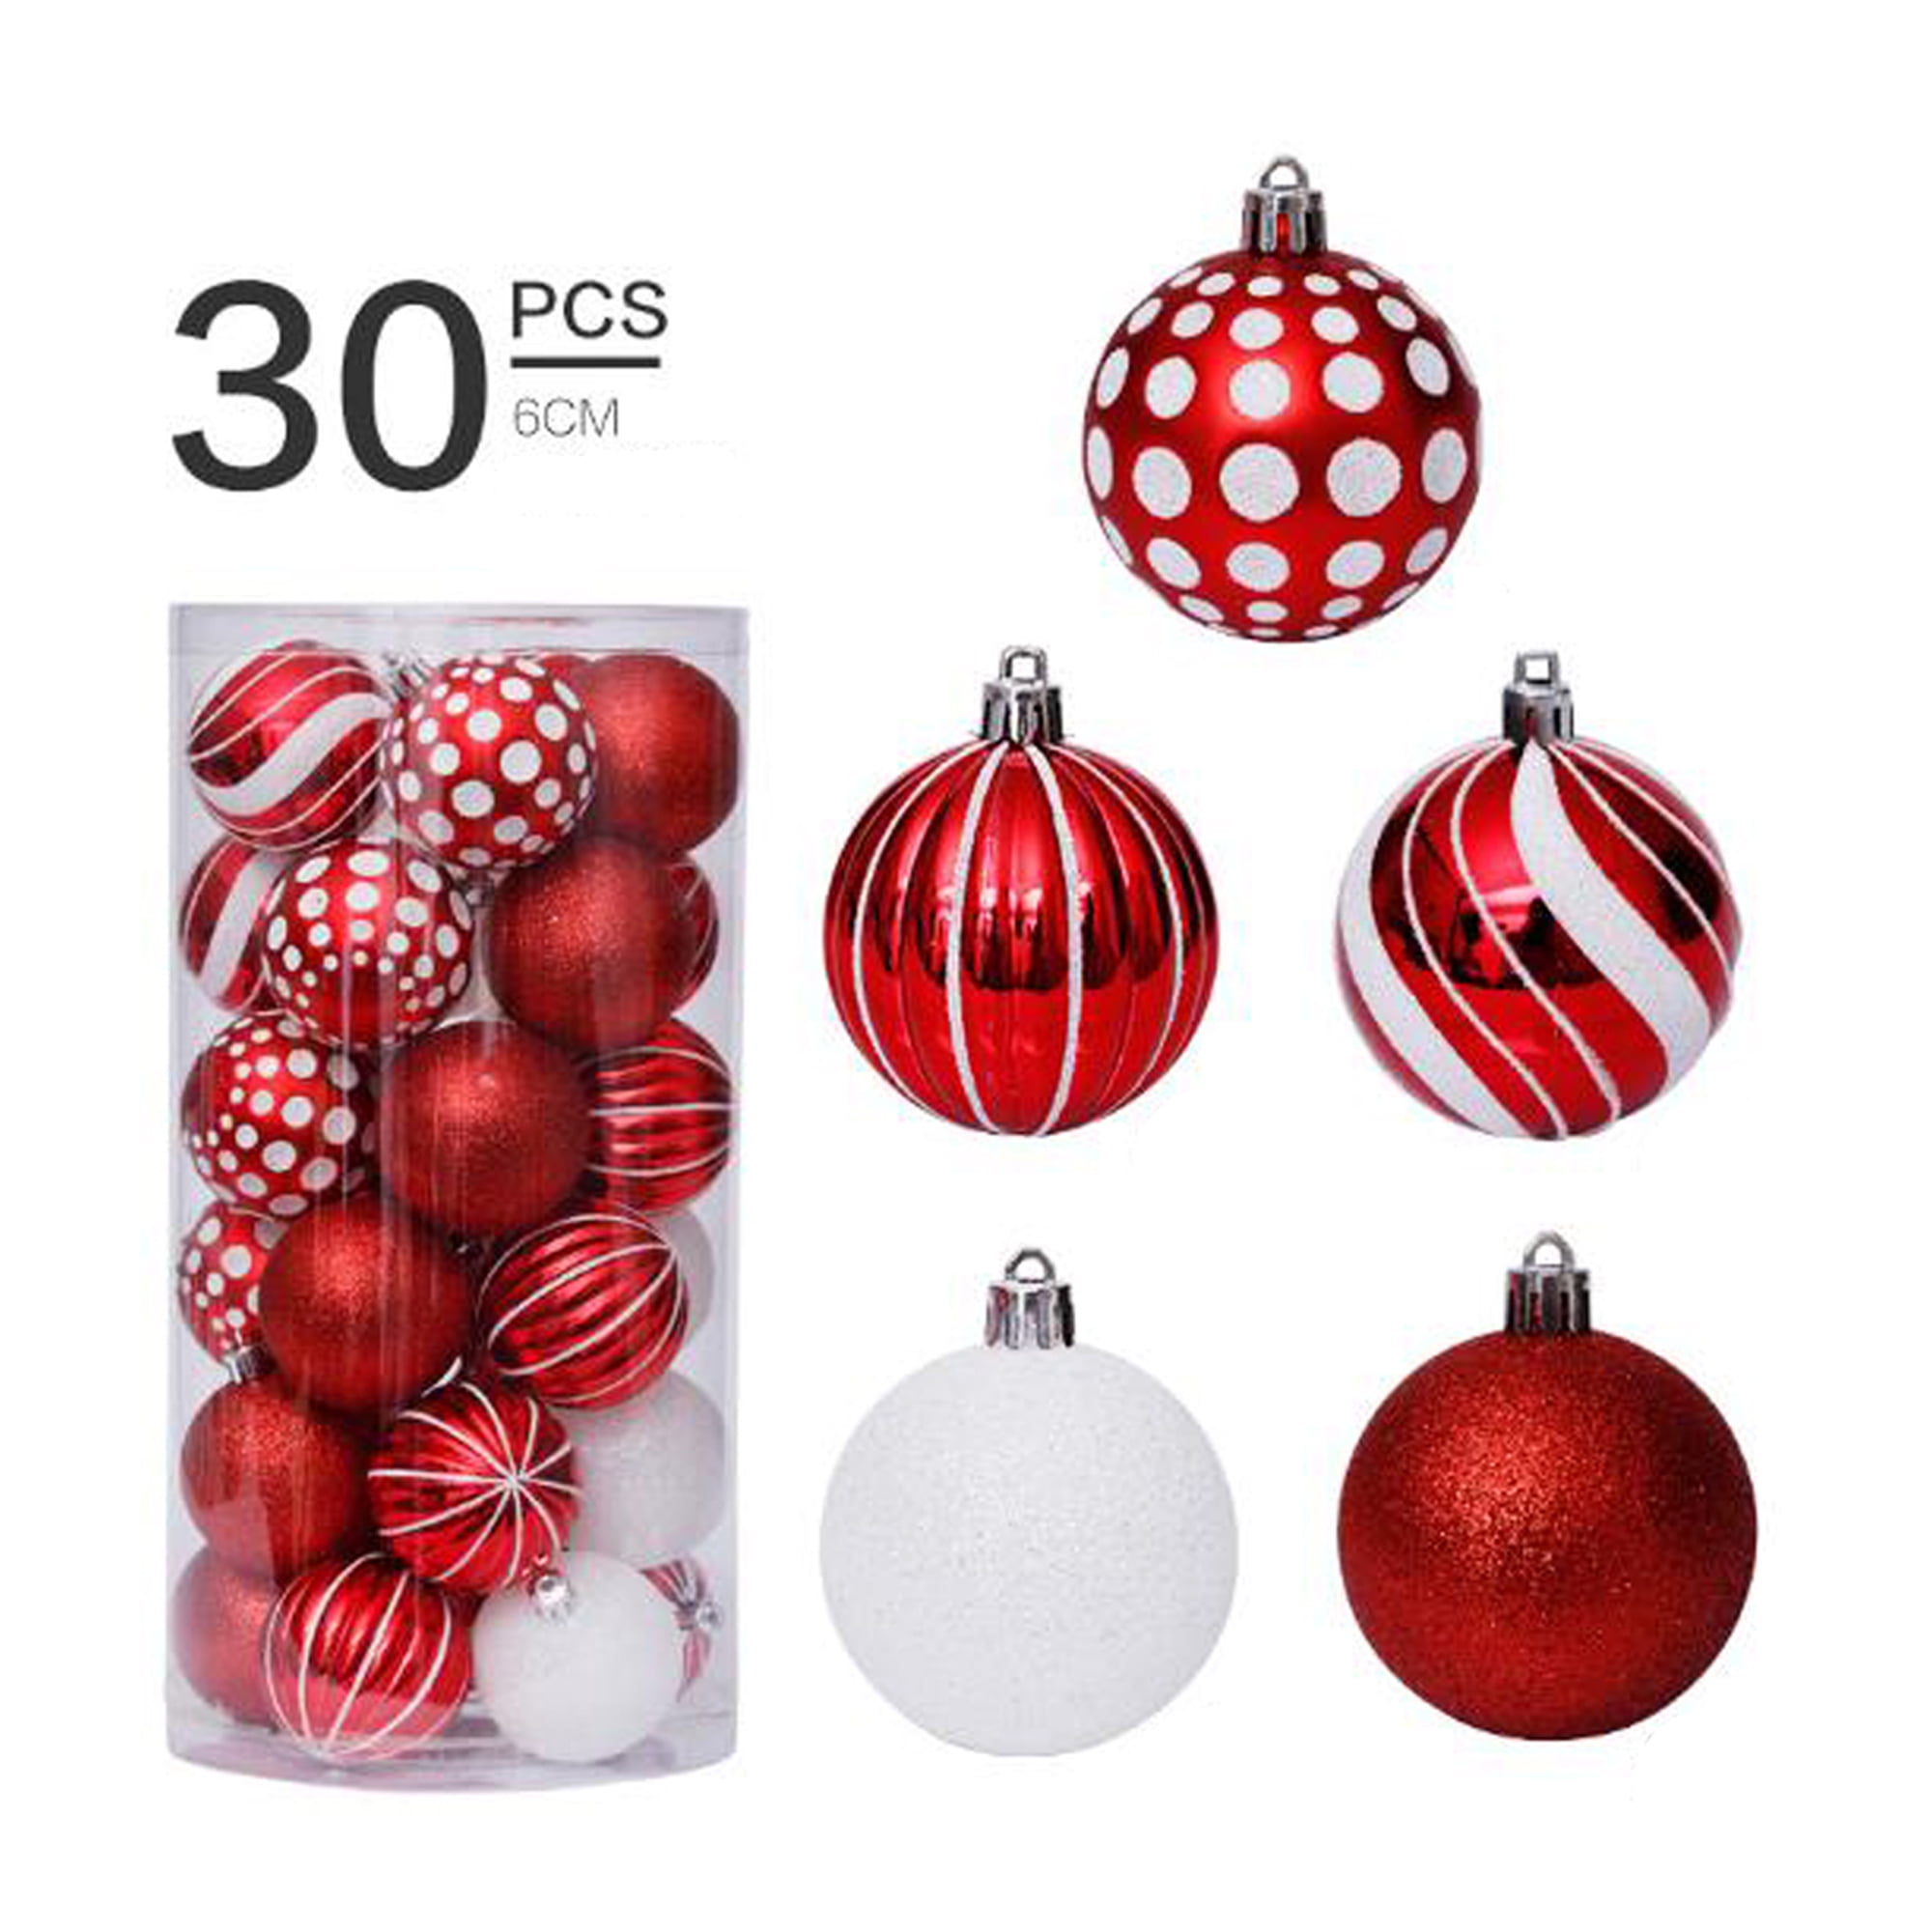 30pcs White Snowflake Charms Party Christmas Tree Ornaments Decorations 3 Sizes 